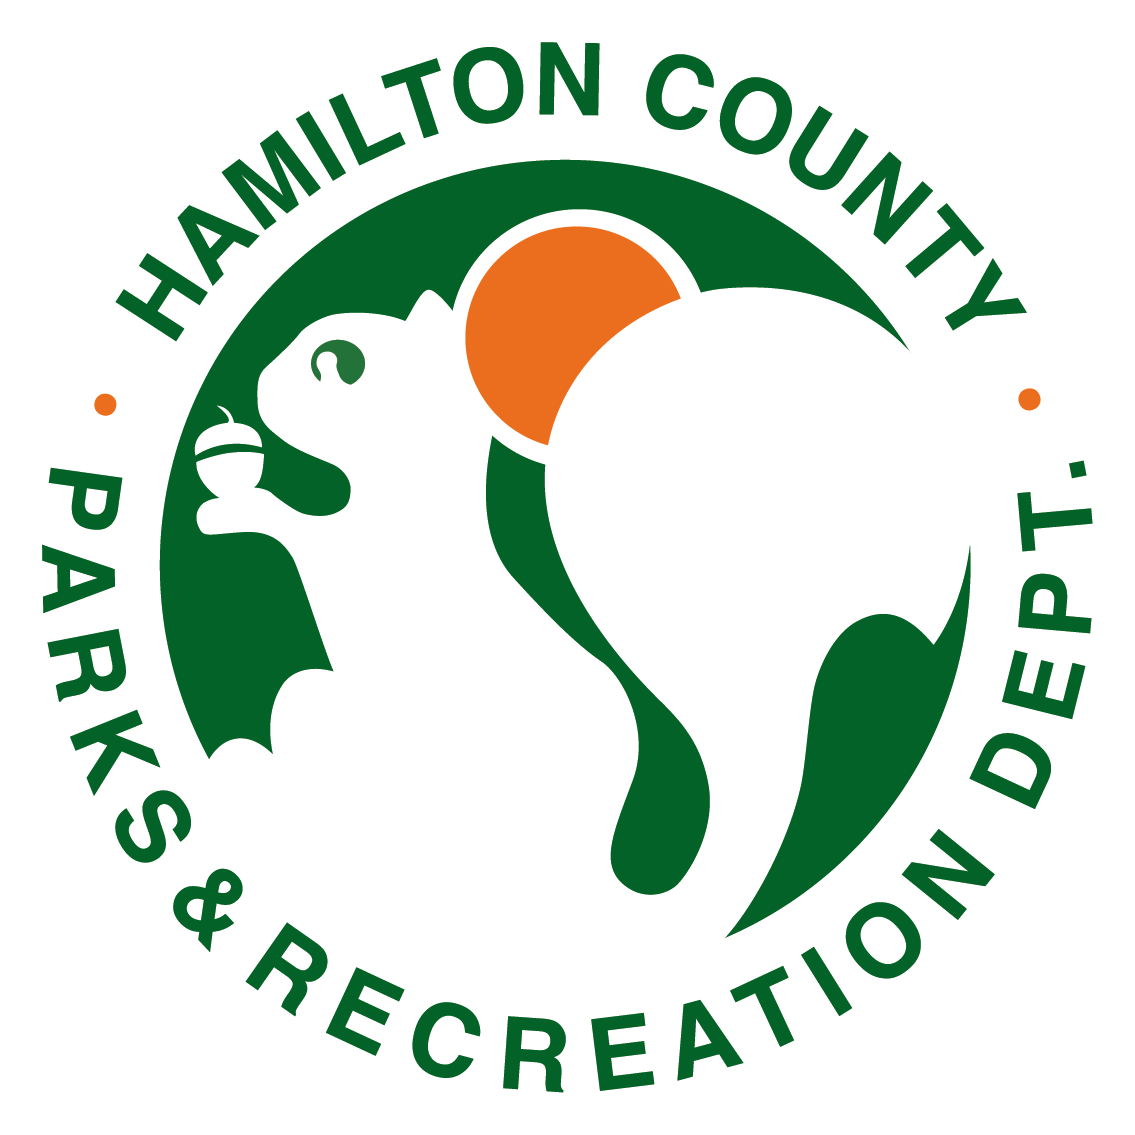 Special Olympics Hamilton County Website for Athletes, Parents